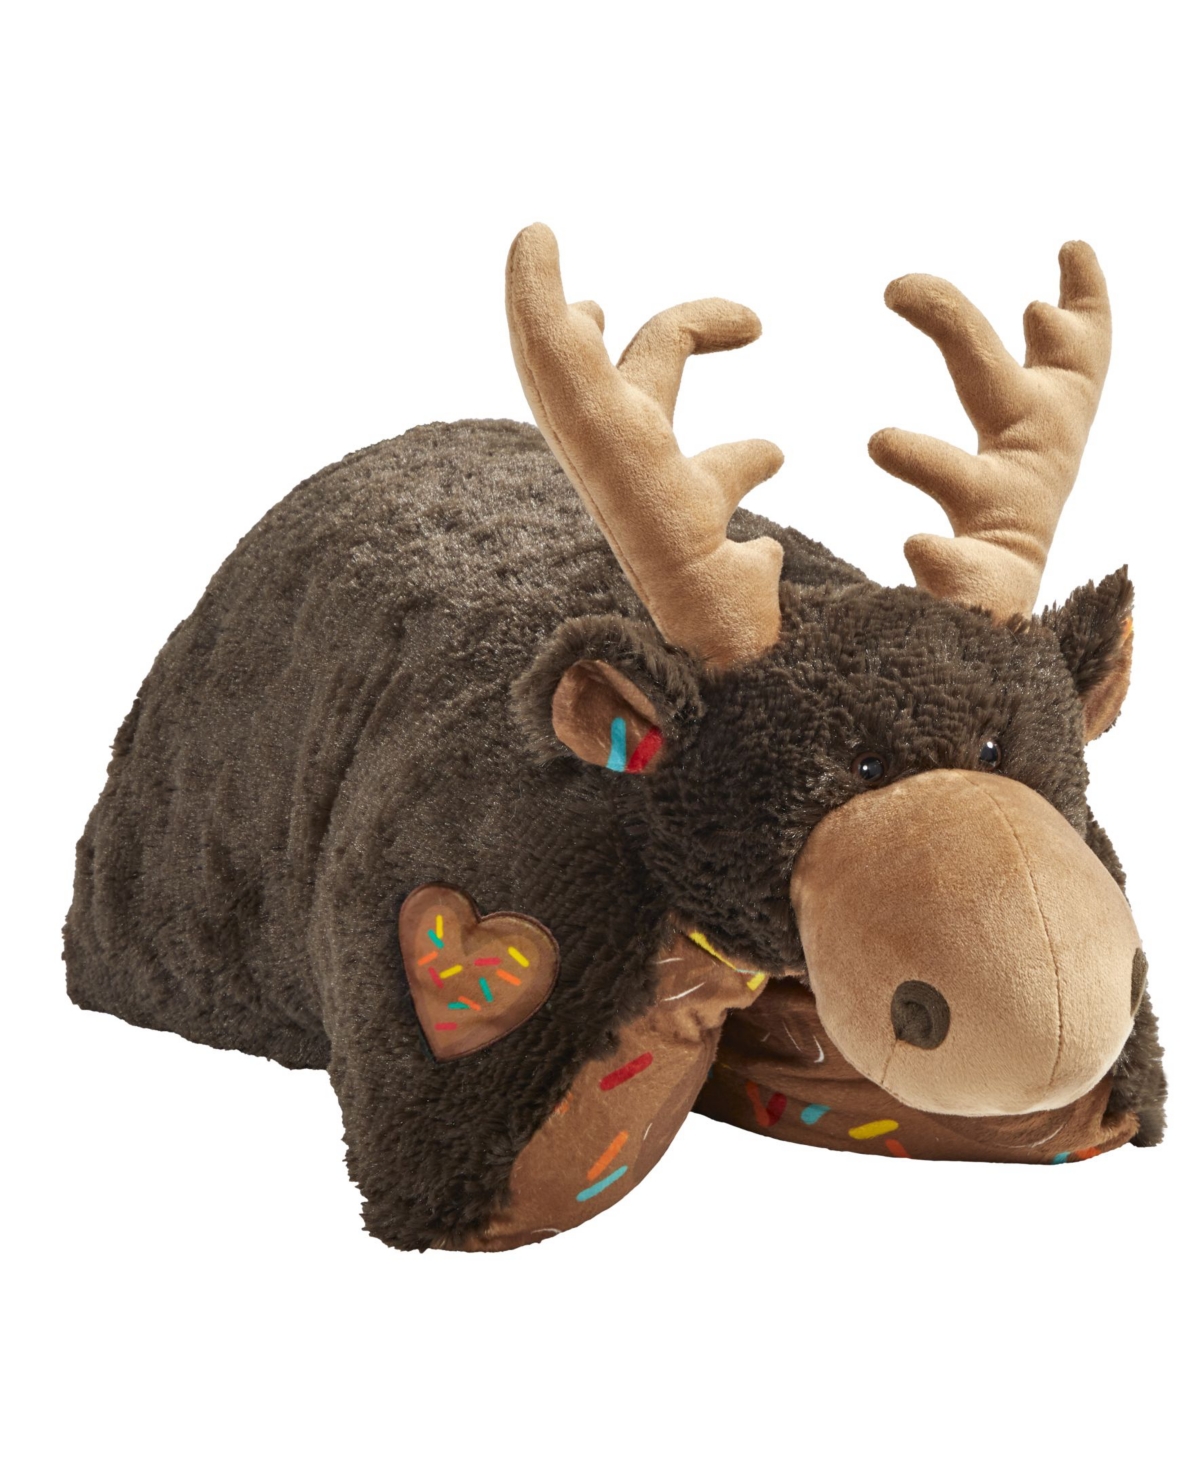 Pillow Pets Kids' Sweet Scented Chocolate Moose Stuffed Animal Plush Toy In Brown